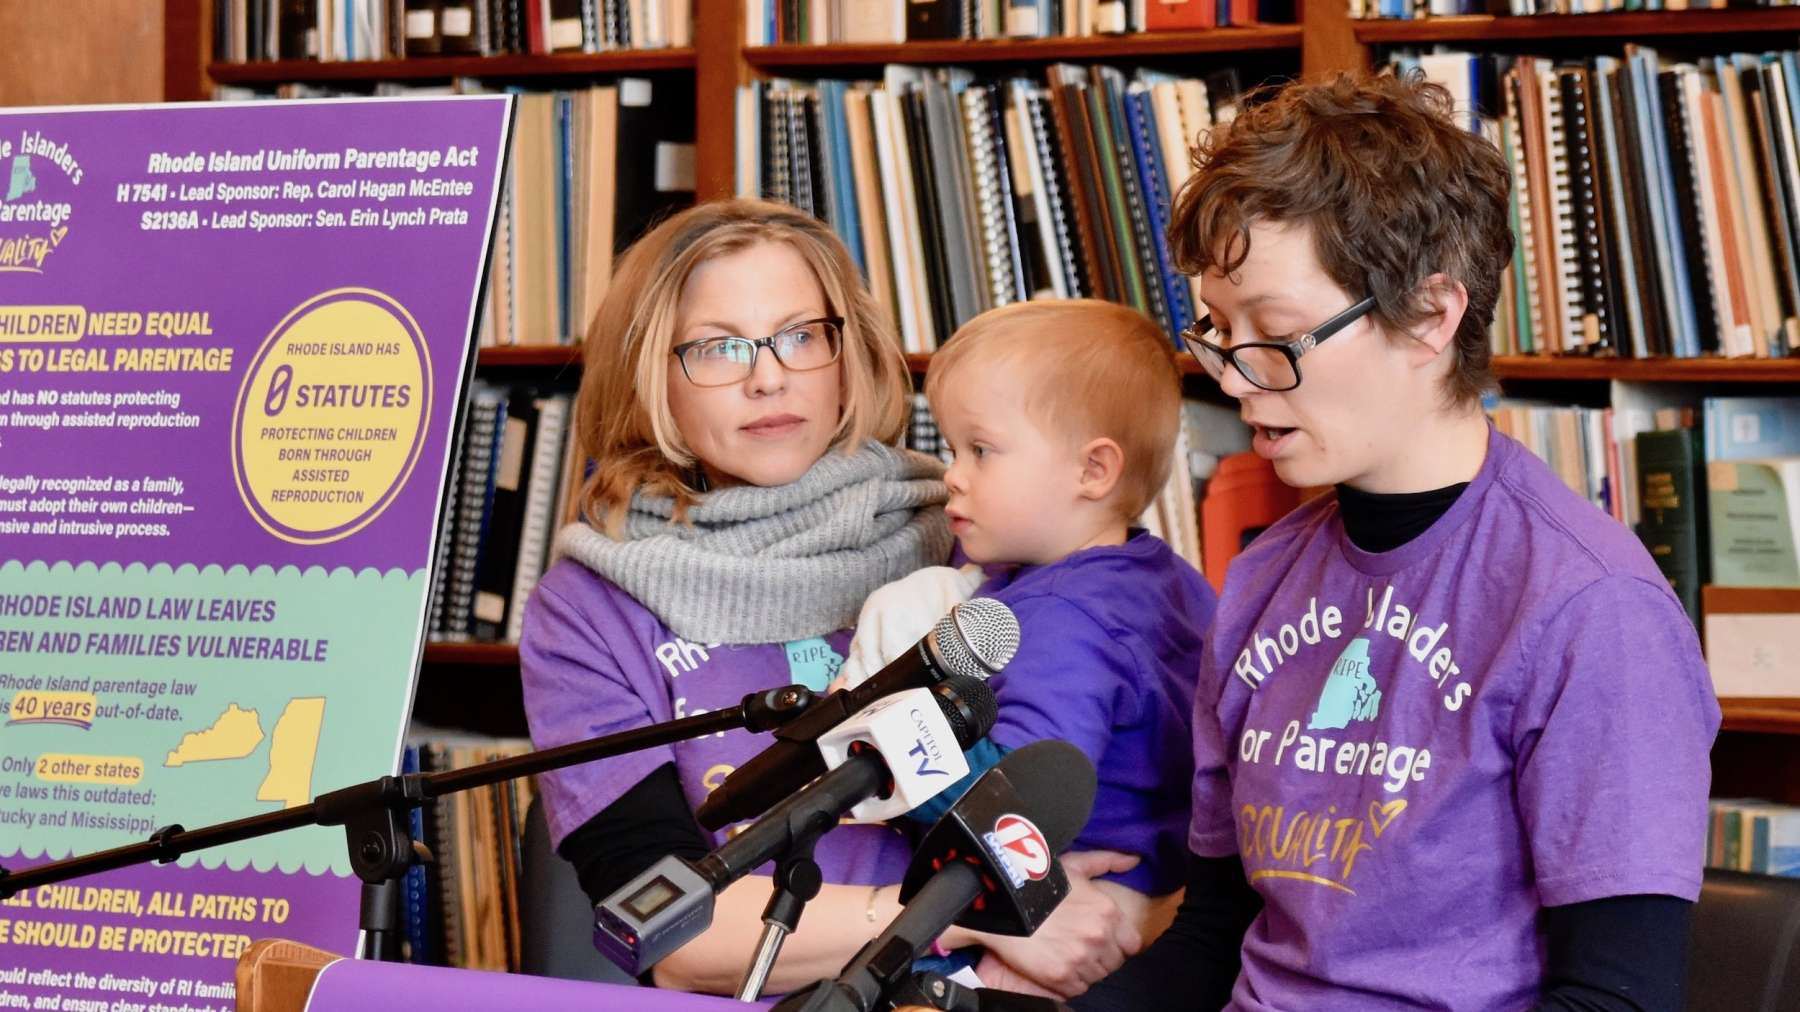 Parents and advocates call for urgently needed comprehensive parentage reform